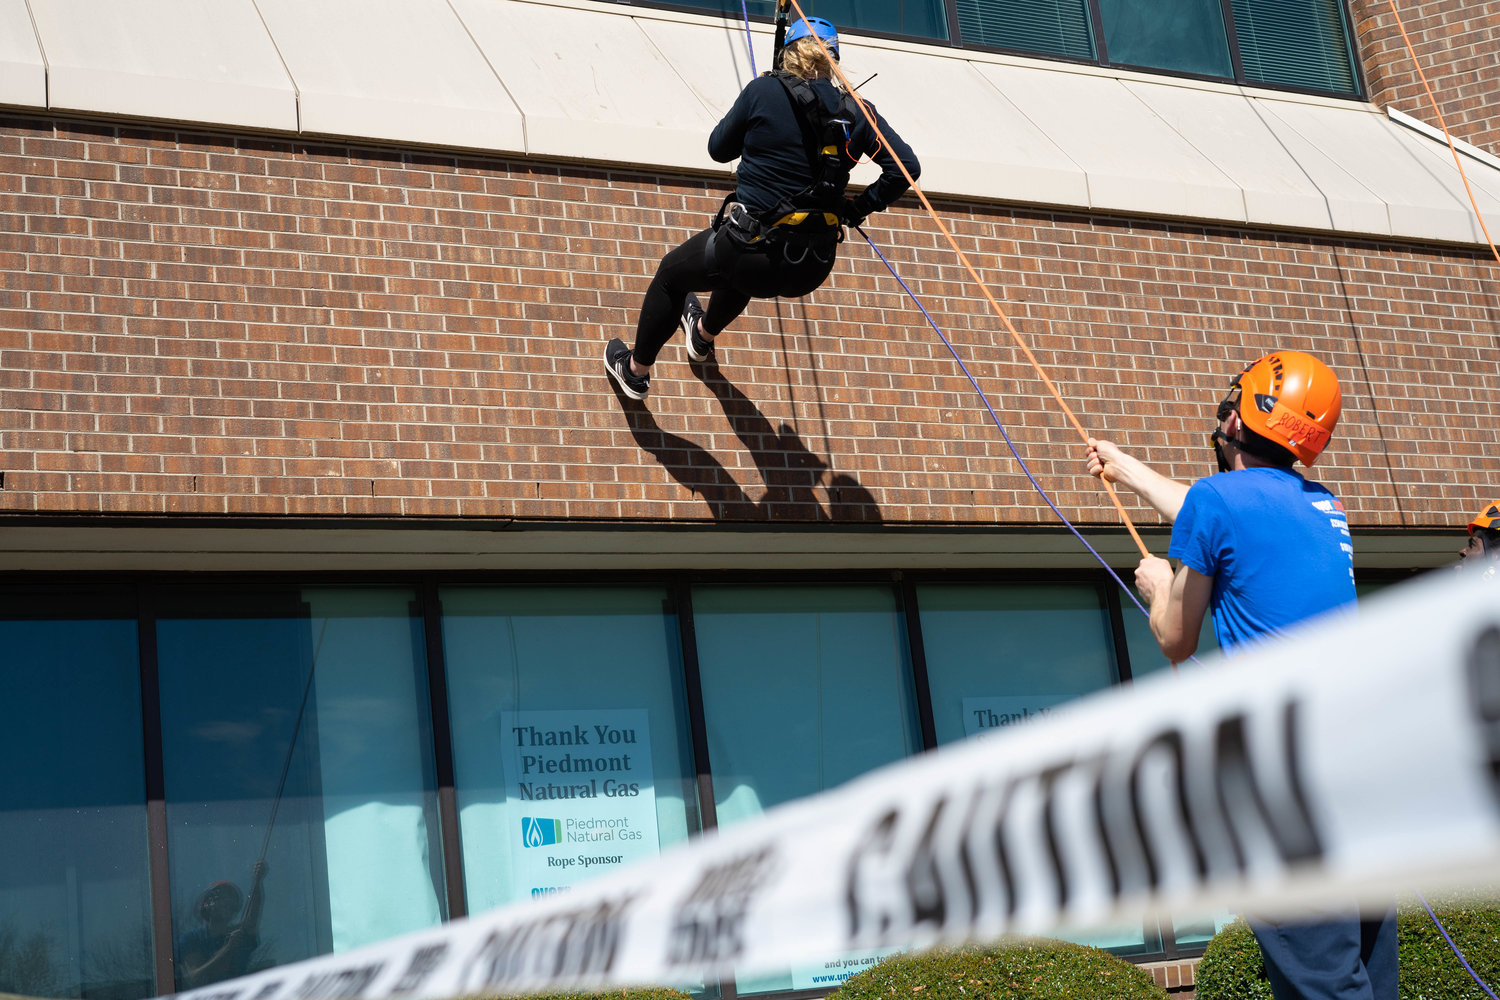 United Way of Cumberland County hosted its Over the Edge fundraiser on March 11 at Cape Fear Valley Medical Arts Center in downtown Fayetteville.